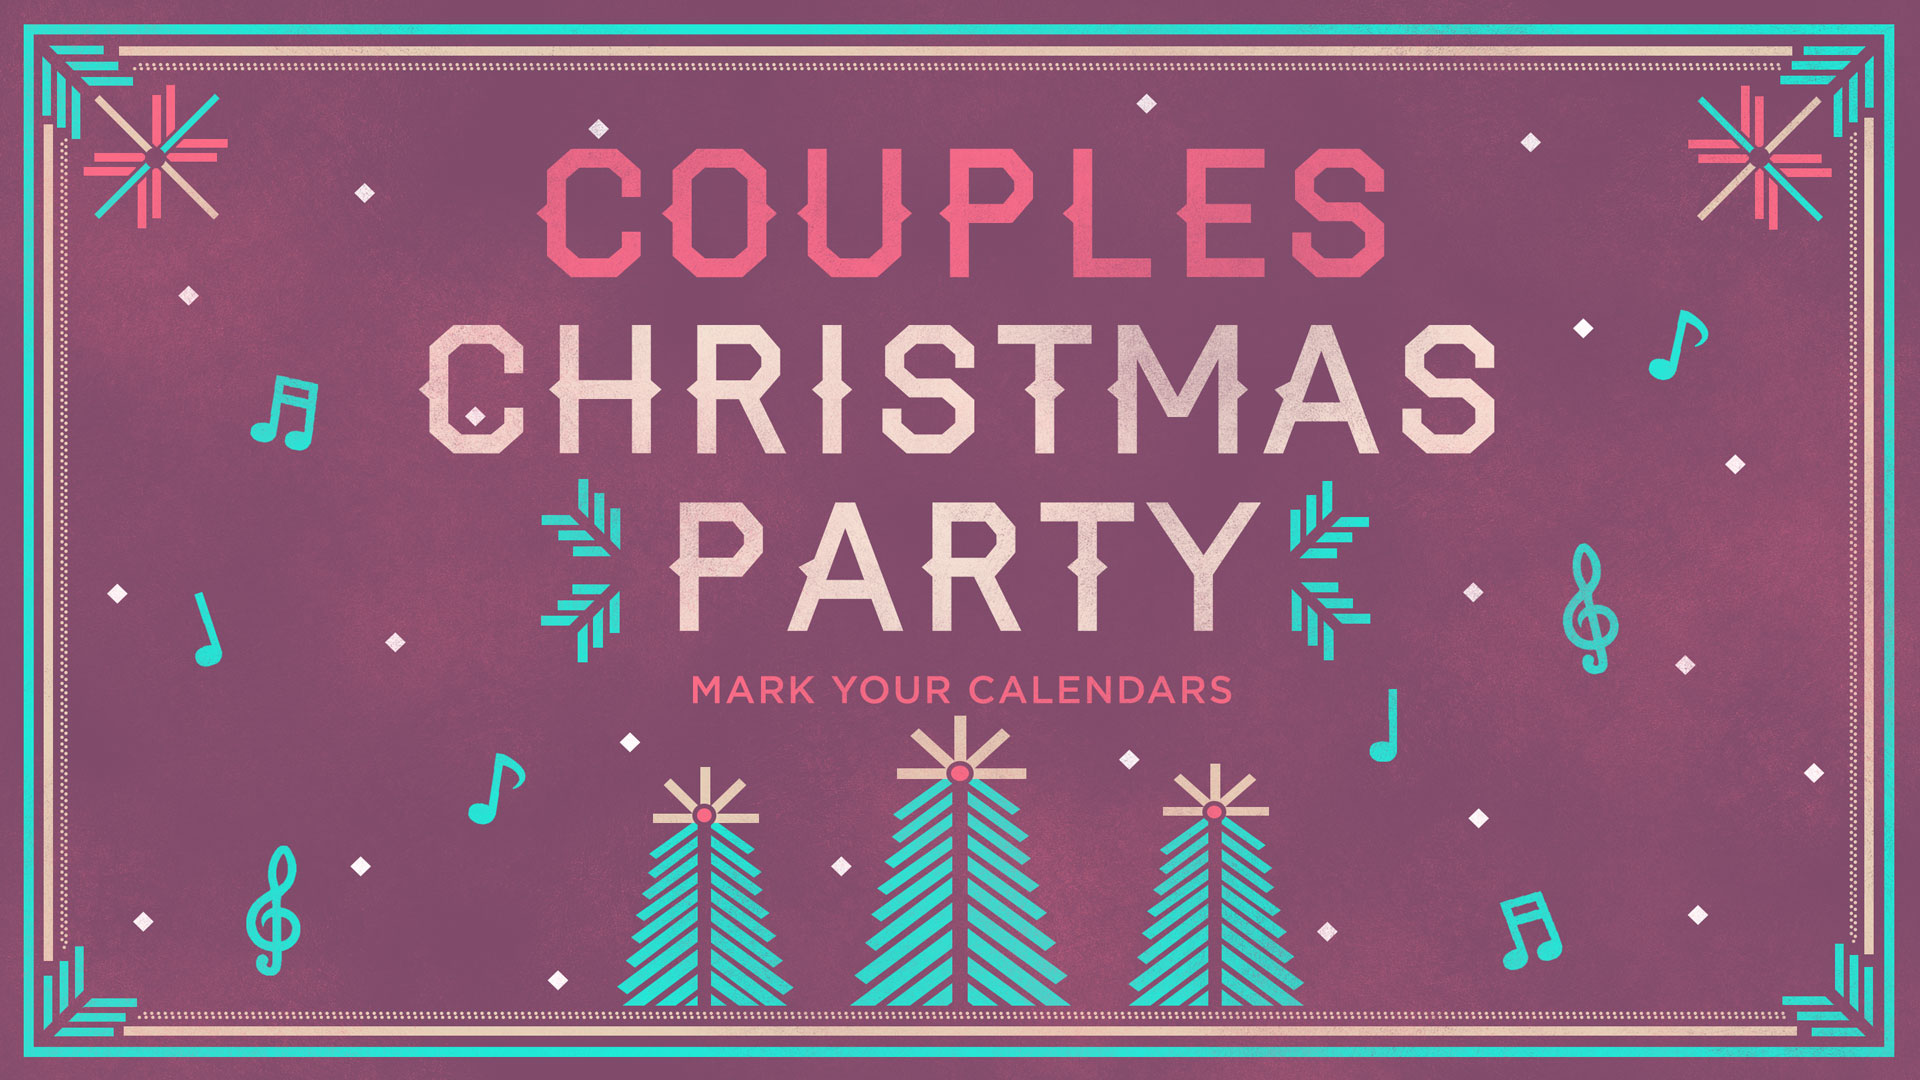 Couples Christmas Party